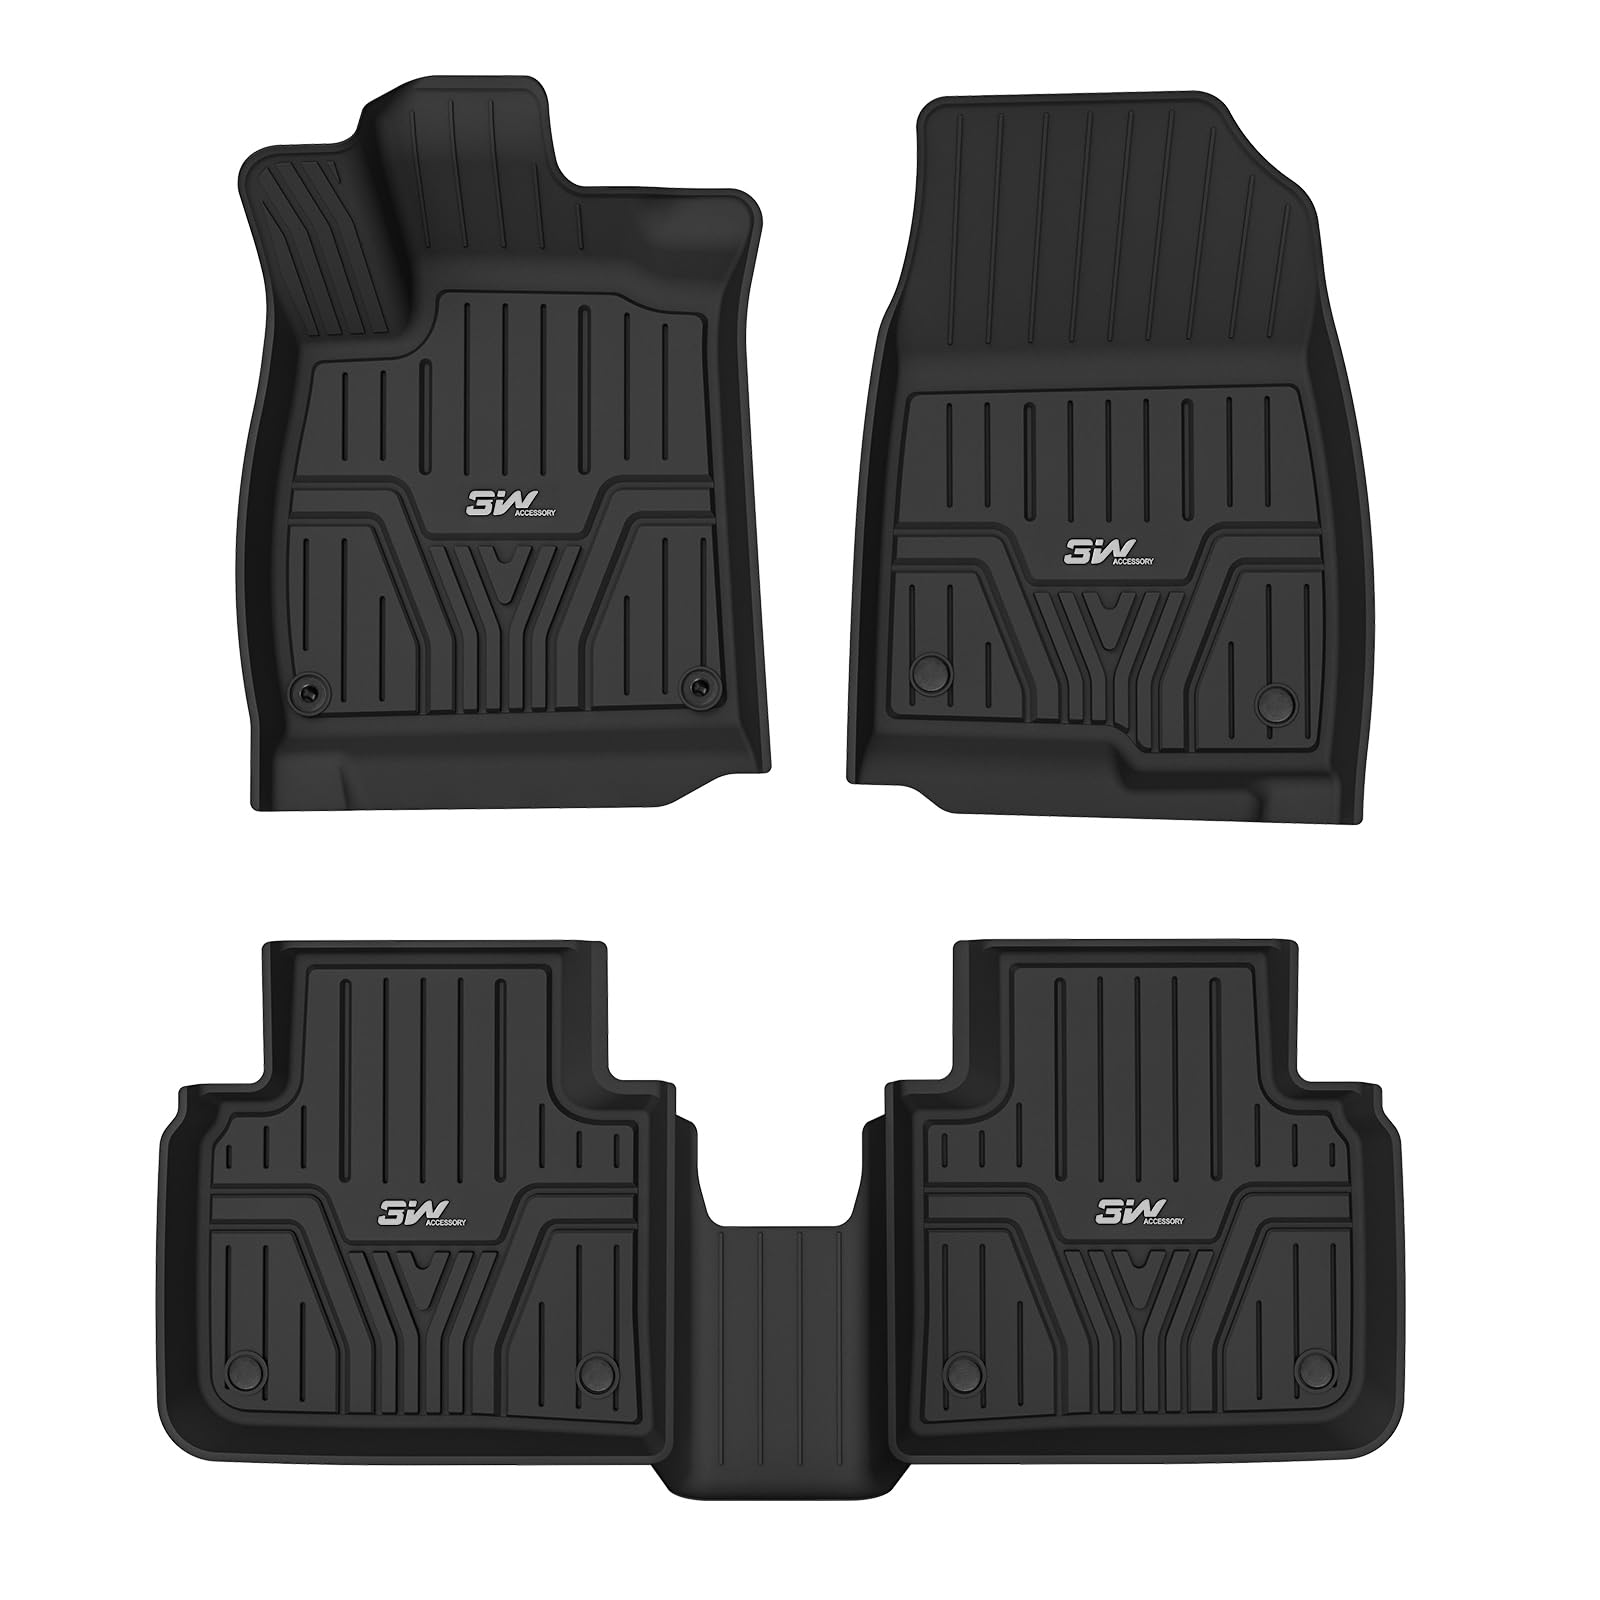 3W Honda Accord 2018-2022 Hatchback Coupe Sedan (Include Hybrid Model) Custom Floor Mats TPE Material & All-Weather Protection Vehicles & Parts 3W 2018-2022 Accord 2018-2022 1st&2nd Row Mats